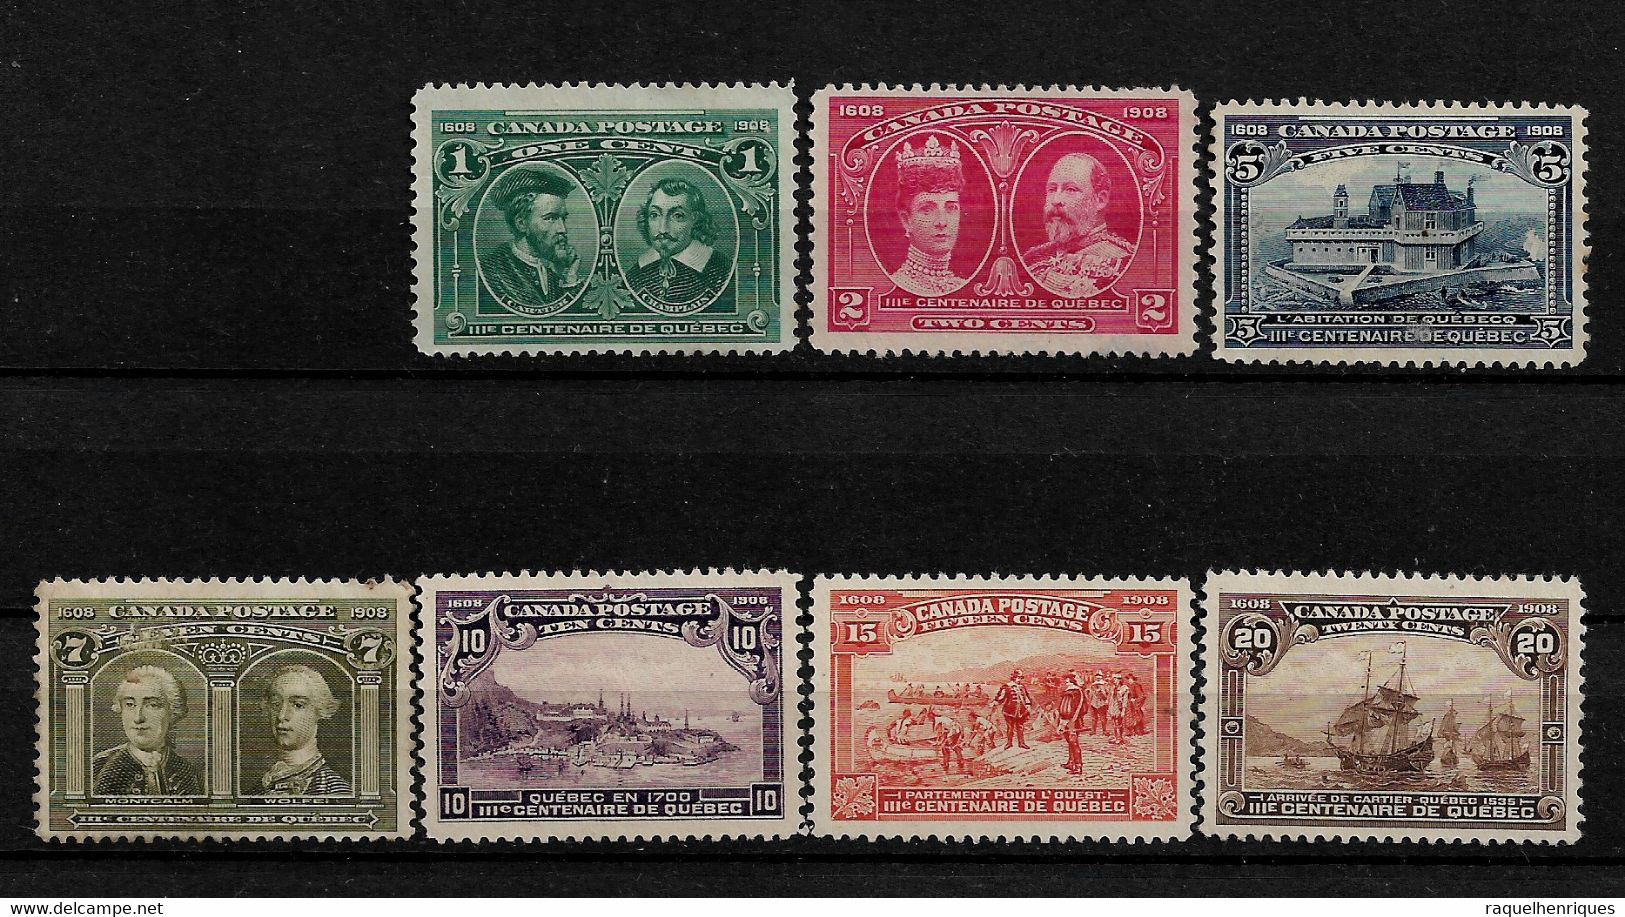 CANADA - 1908 The 300th Anniversary Of The Founding Of Quebec MINT NO GUM - MISSING FIRST VALUE 1/2 CENT (STB1) - Unused Stamps